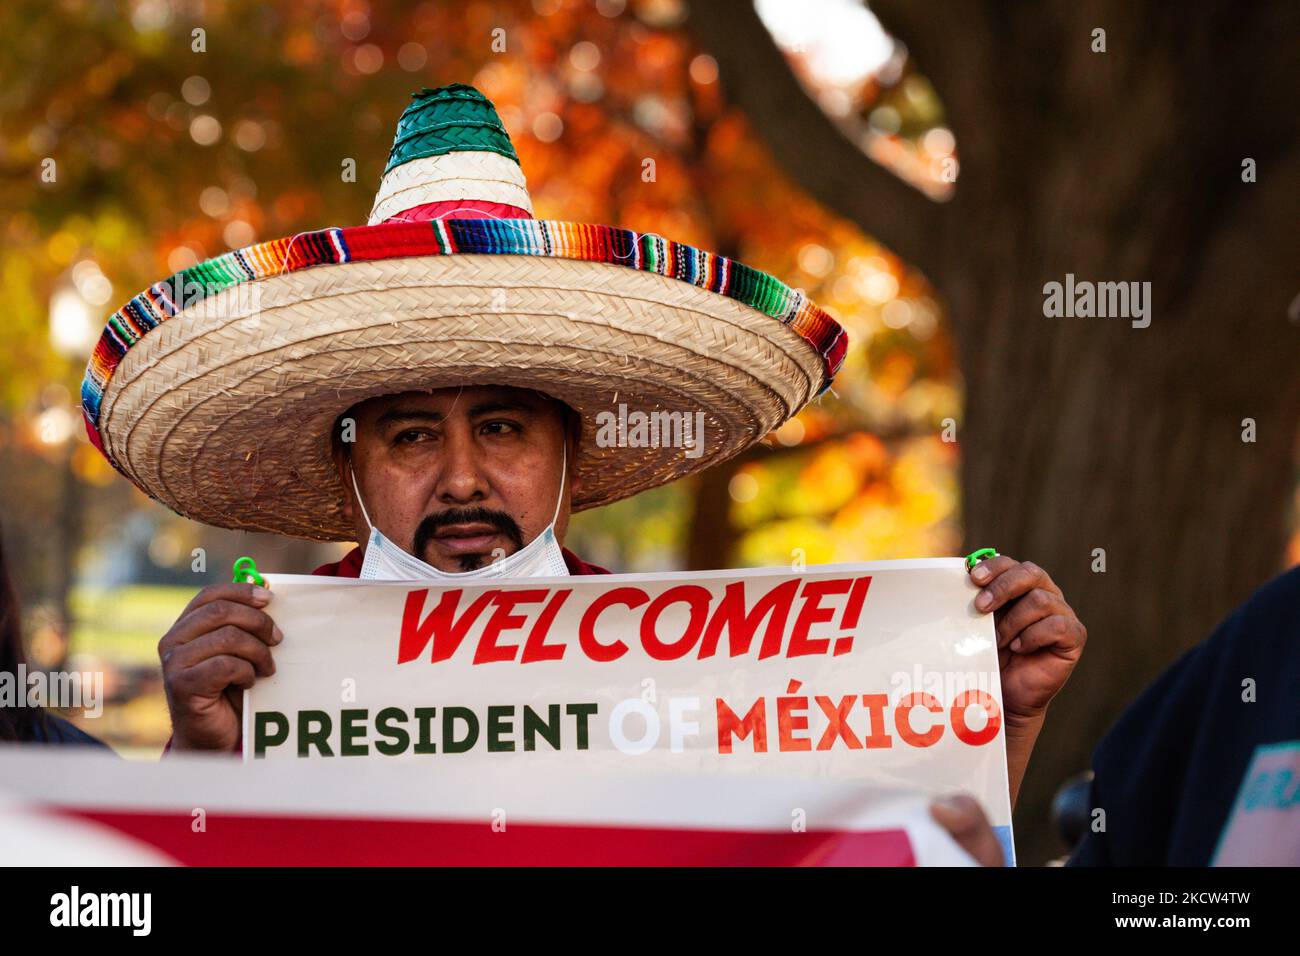 A protester celebrates the summit of President Andrés Manuel López Obrador of Mexico with President Joe Biden and Canadian Prime Minister Justin Trudeau at the White House. Demonstrators are demanding immigration reform while also cheering on the Mexican president. (Photo by Allison Bailey/NurPhoto) Stock Photo